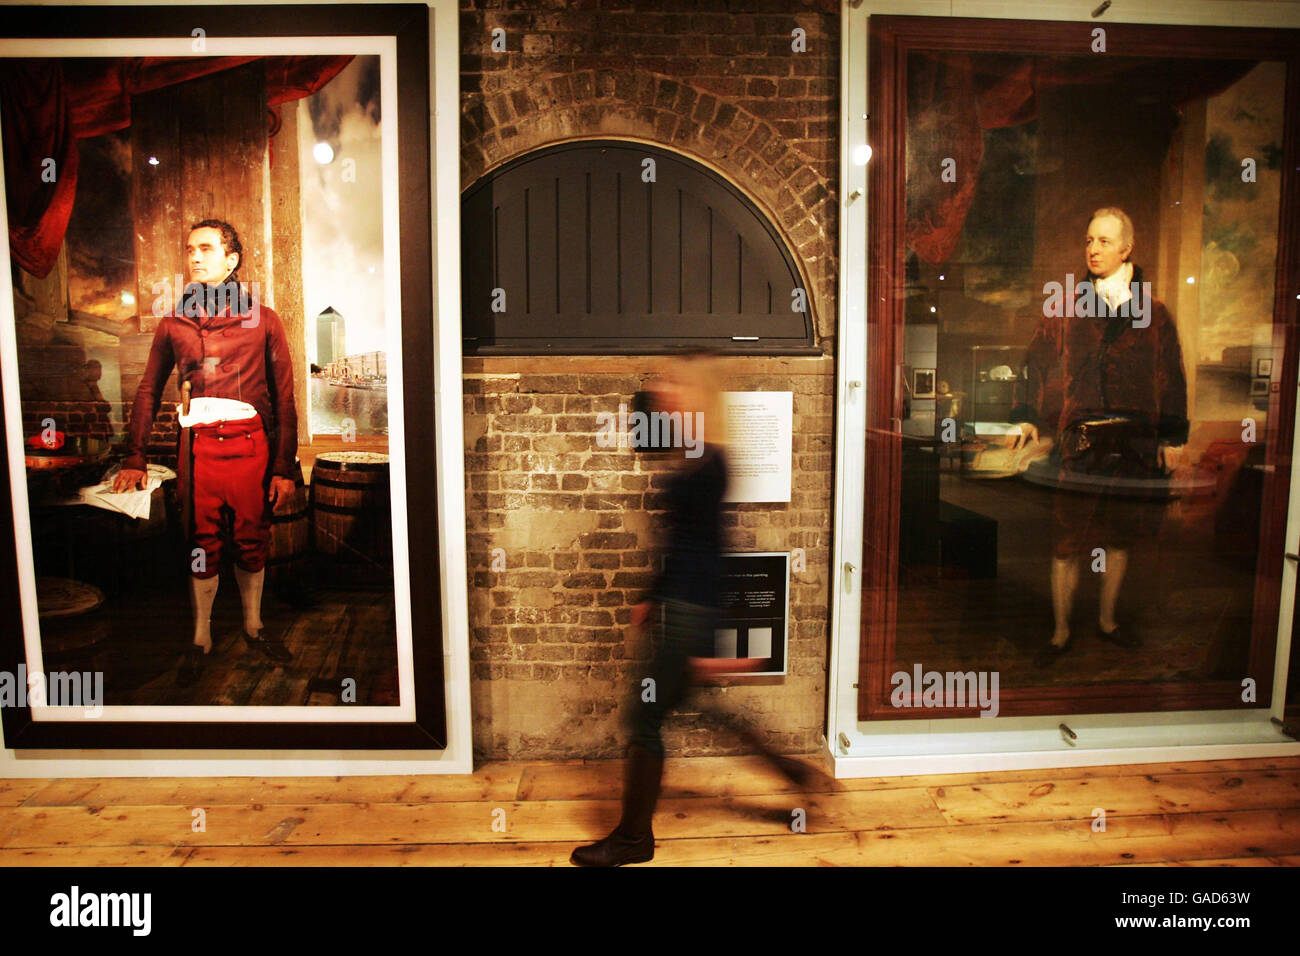 A member of staff walks between portraits of slave trader George Hibbert (right) and a modern reconstructed laserchrome photograph on aluminium portrait of Lloyd Gordon as Robert Wedderburn, at the 'London, Sugar & Slavery' at The Museum in Docklands, London. Stock Photo